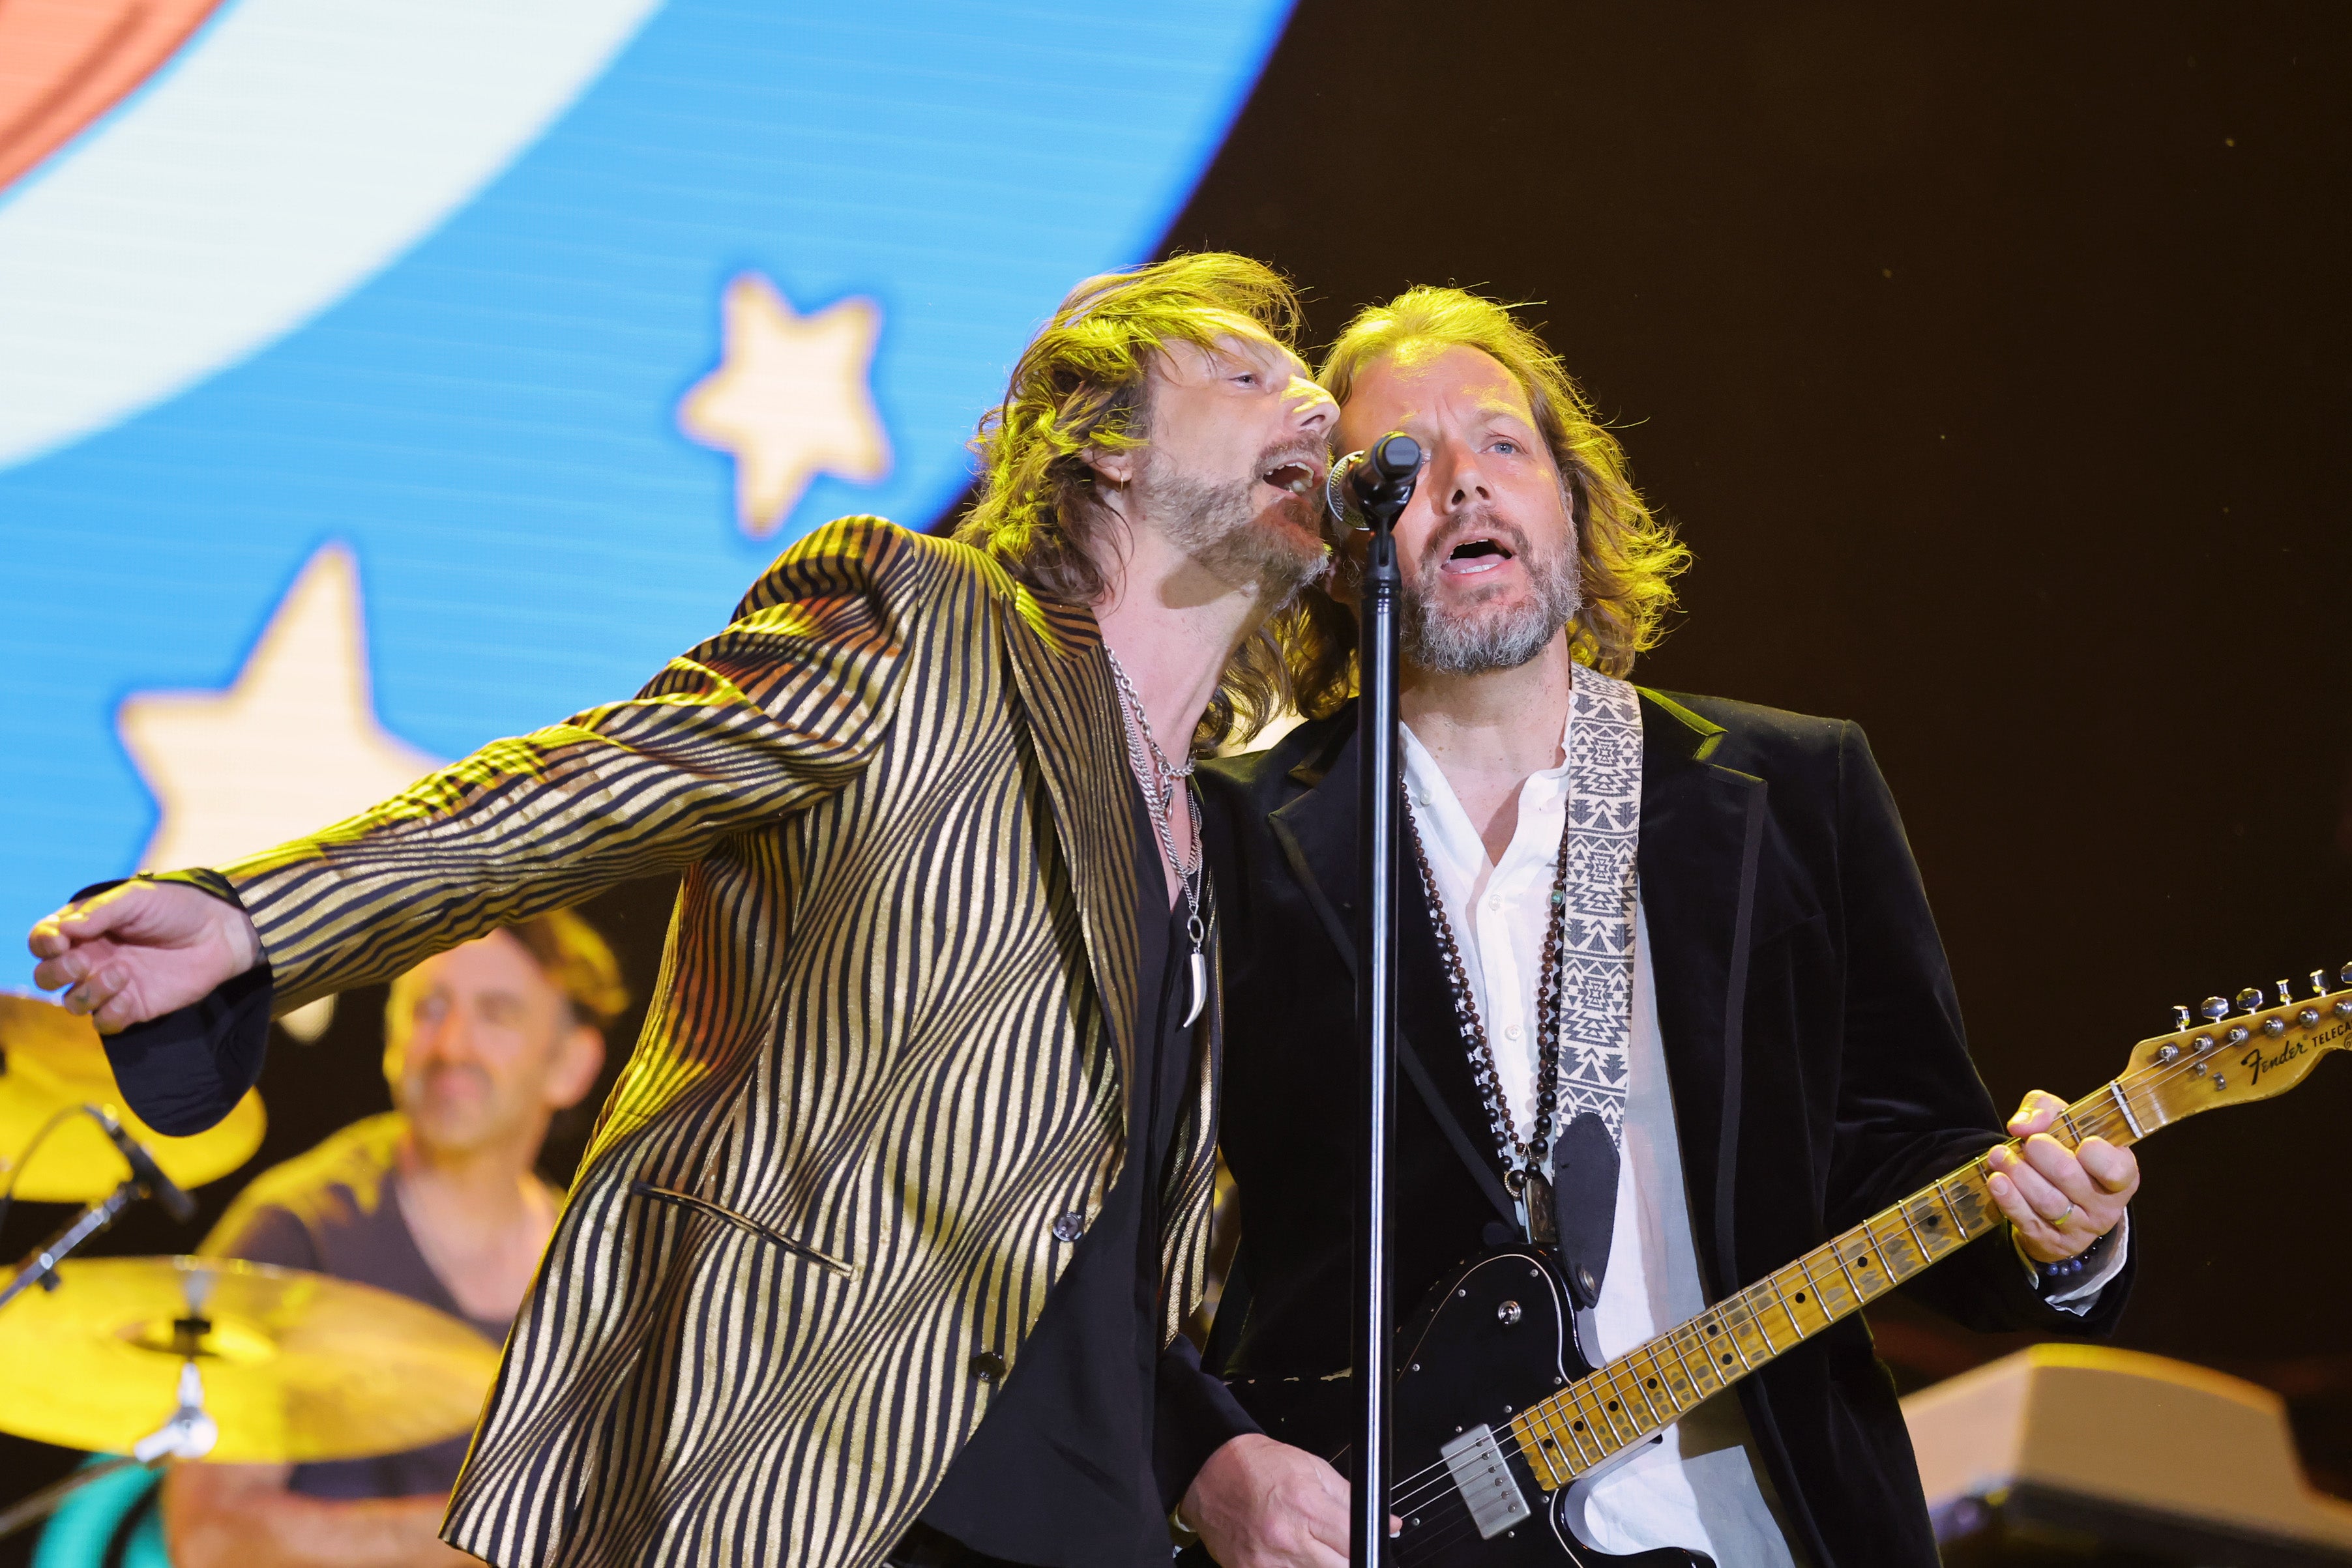 Brothers Chris (left) and Rich Robinson on stage in May